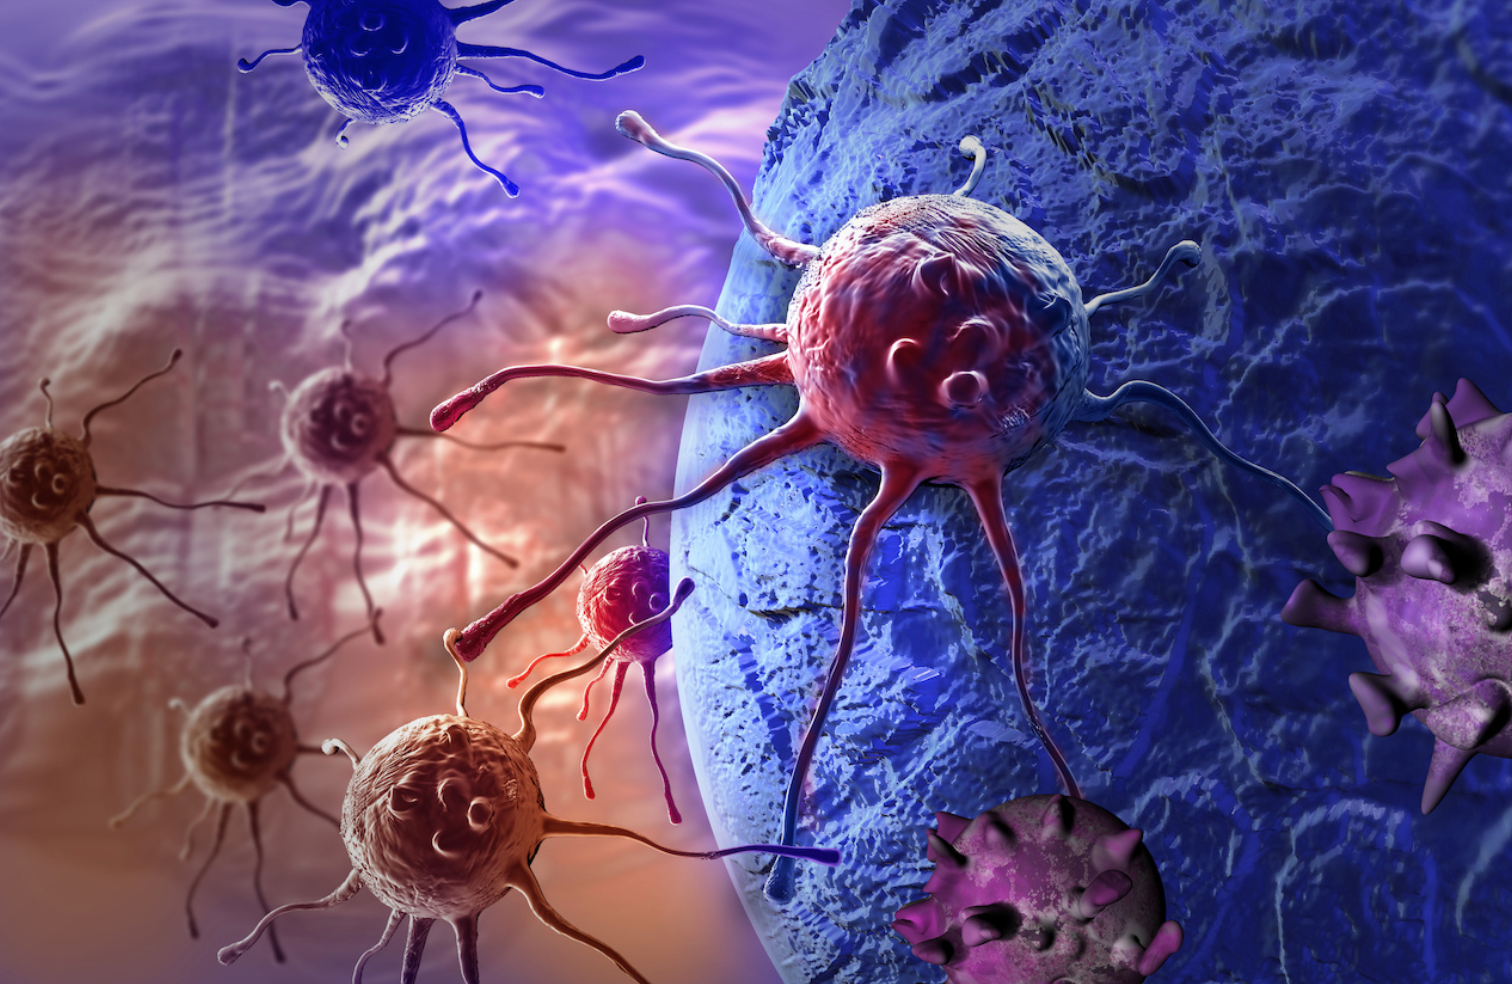 Novel Treatment Shows Promising Antitumor Activity Against HER2+ Cancers